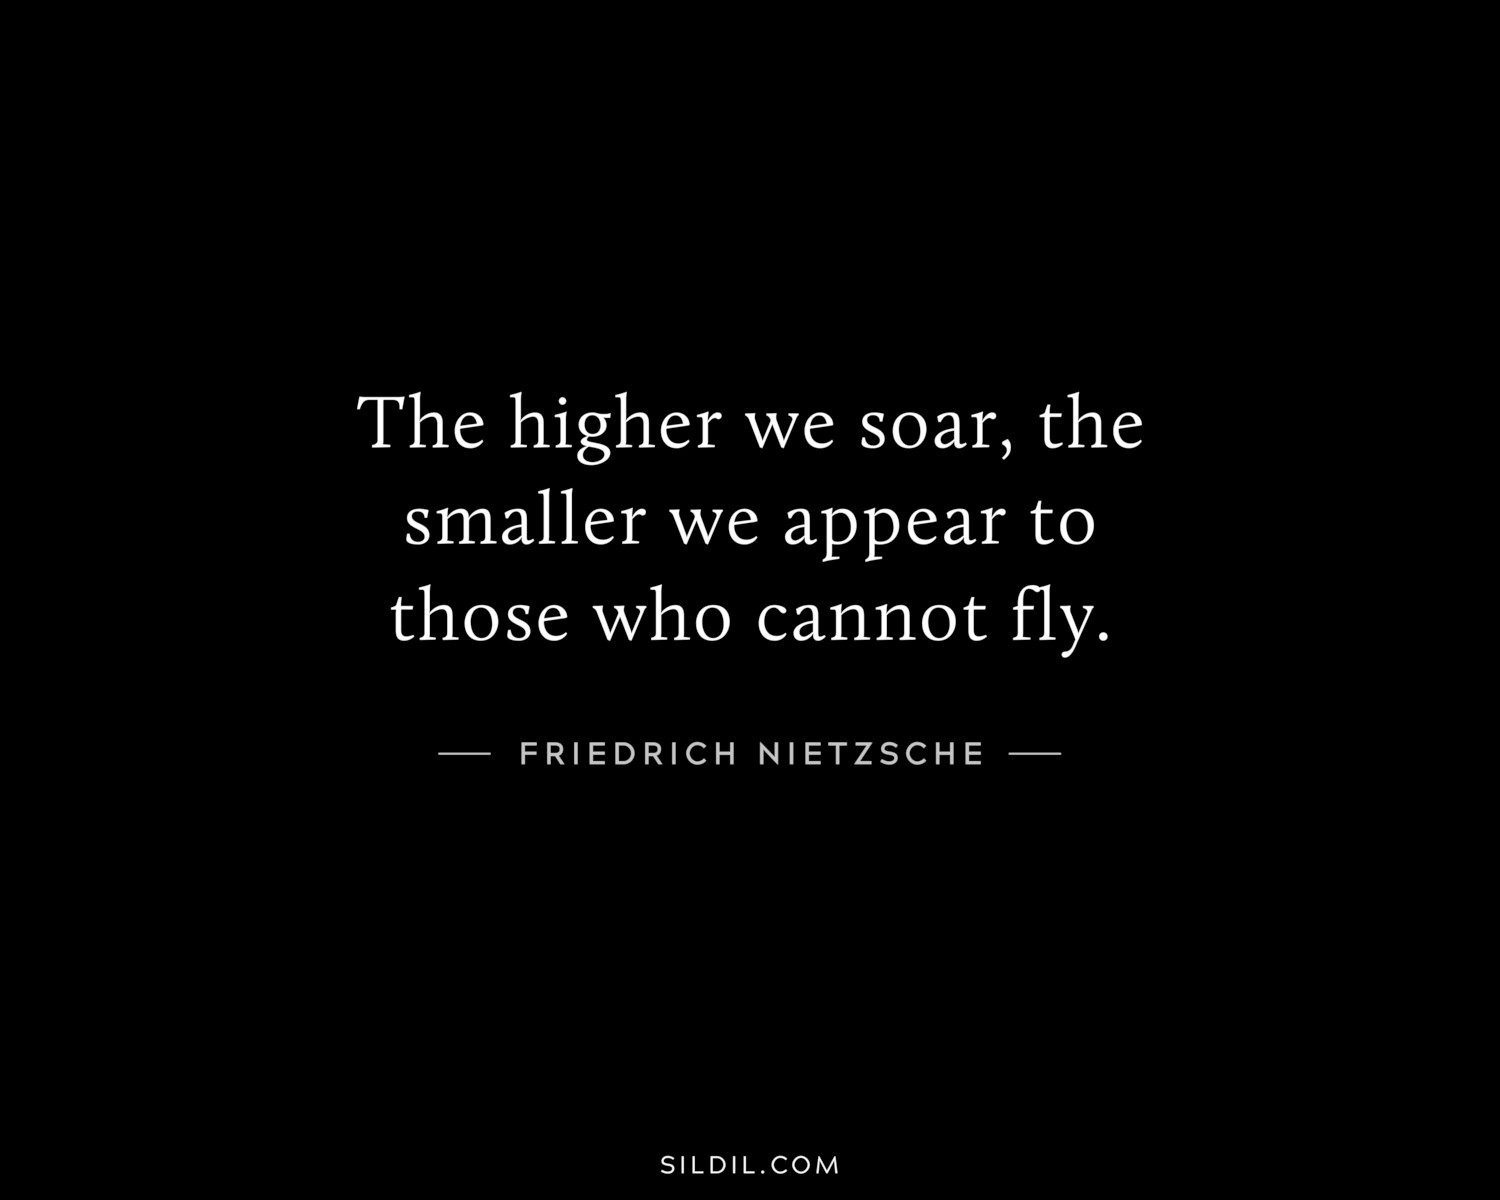 The higher we soar, the smaller we appear to those who cannot fly.